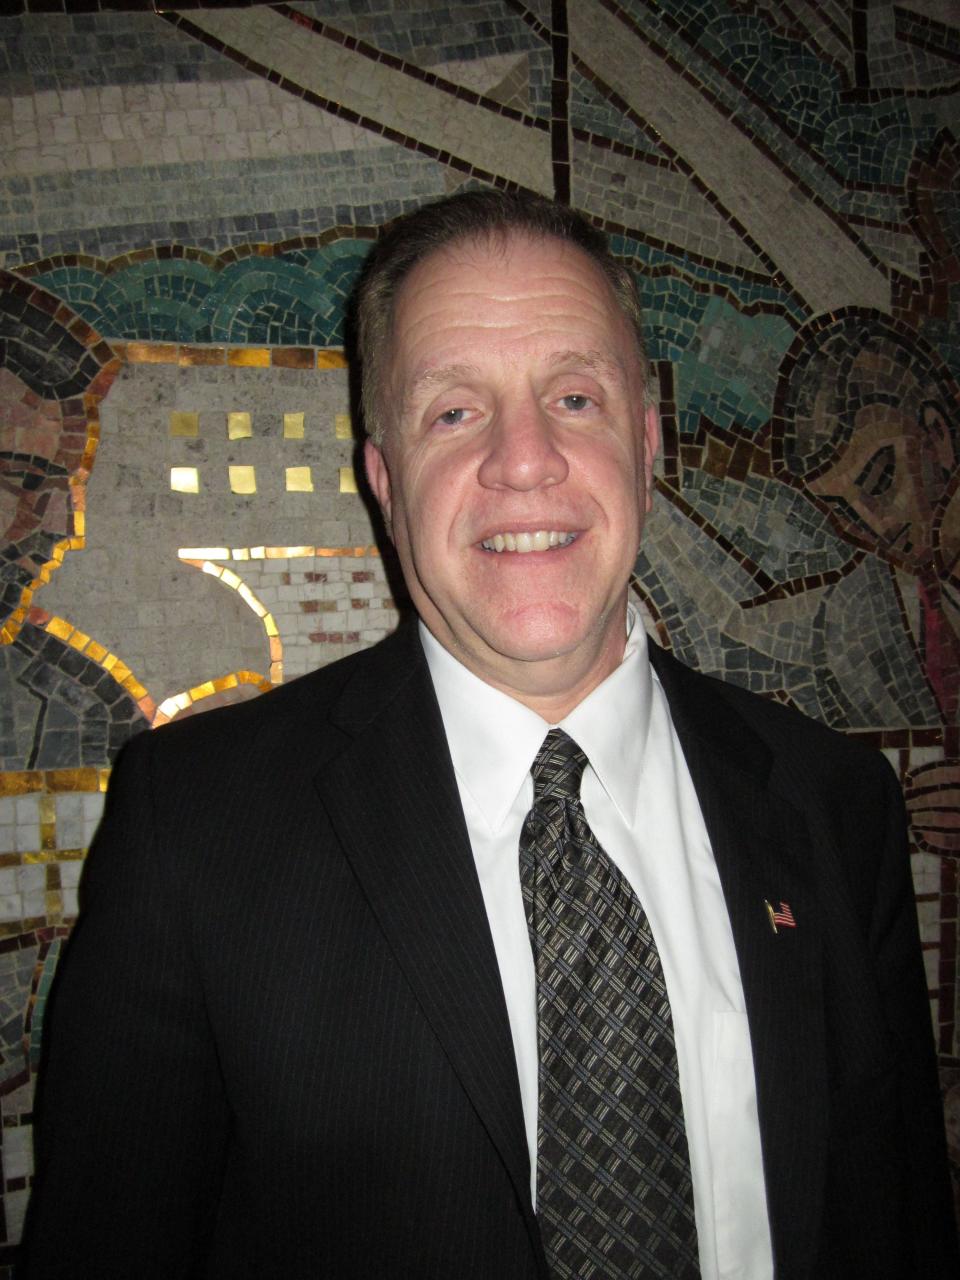 Cortlandt Supervisor Richard Becker, pictured in 2012 when he was seeking the Democratic nomination for US Congress, ran on his experience. Now he pushed for a $6,500-per-month consulting deal for his predecessor.